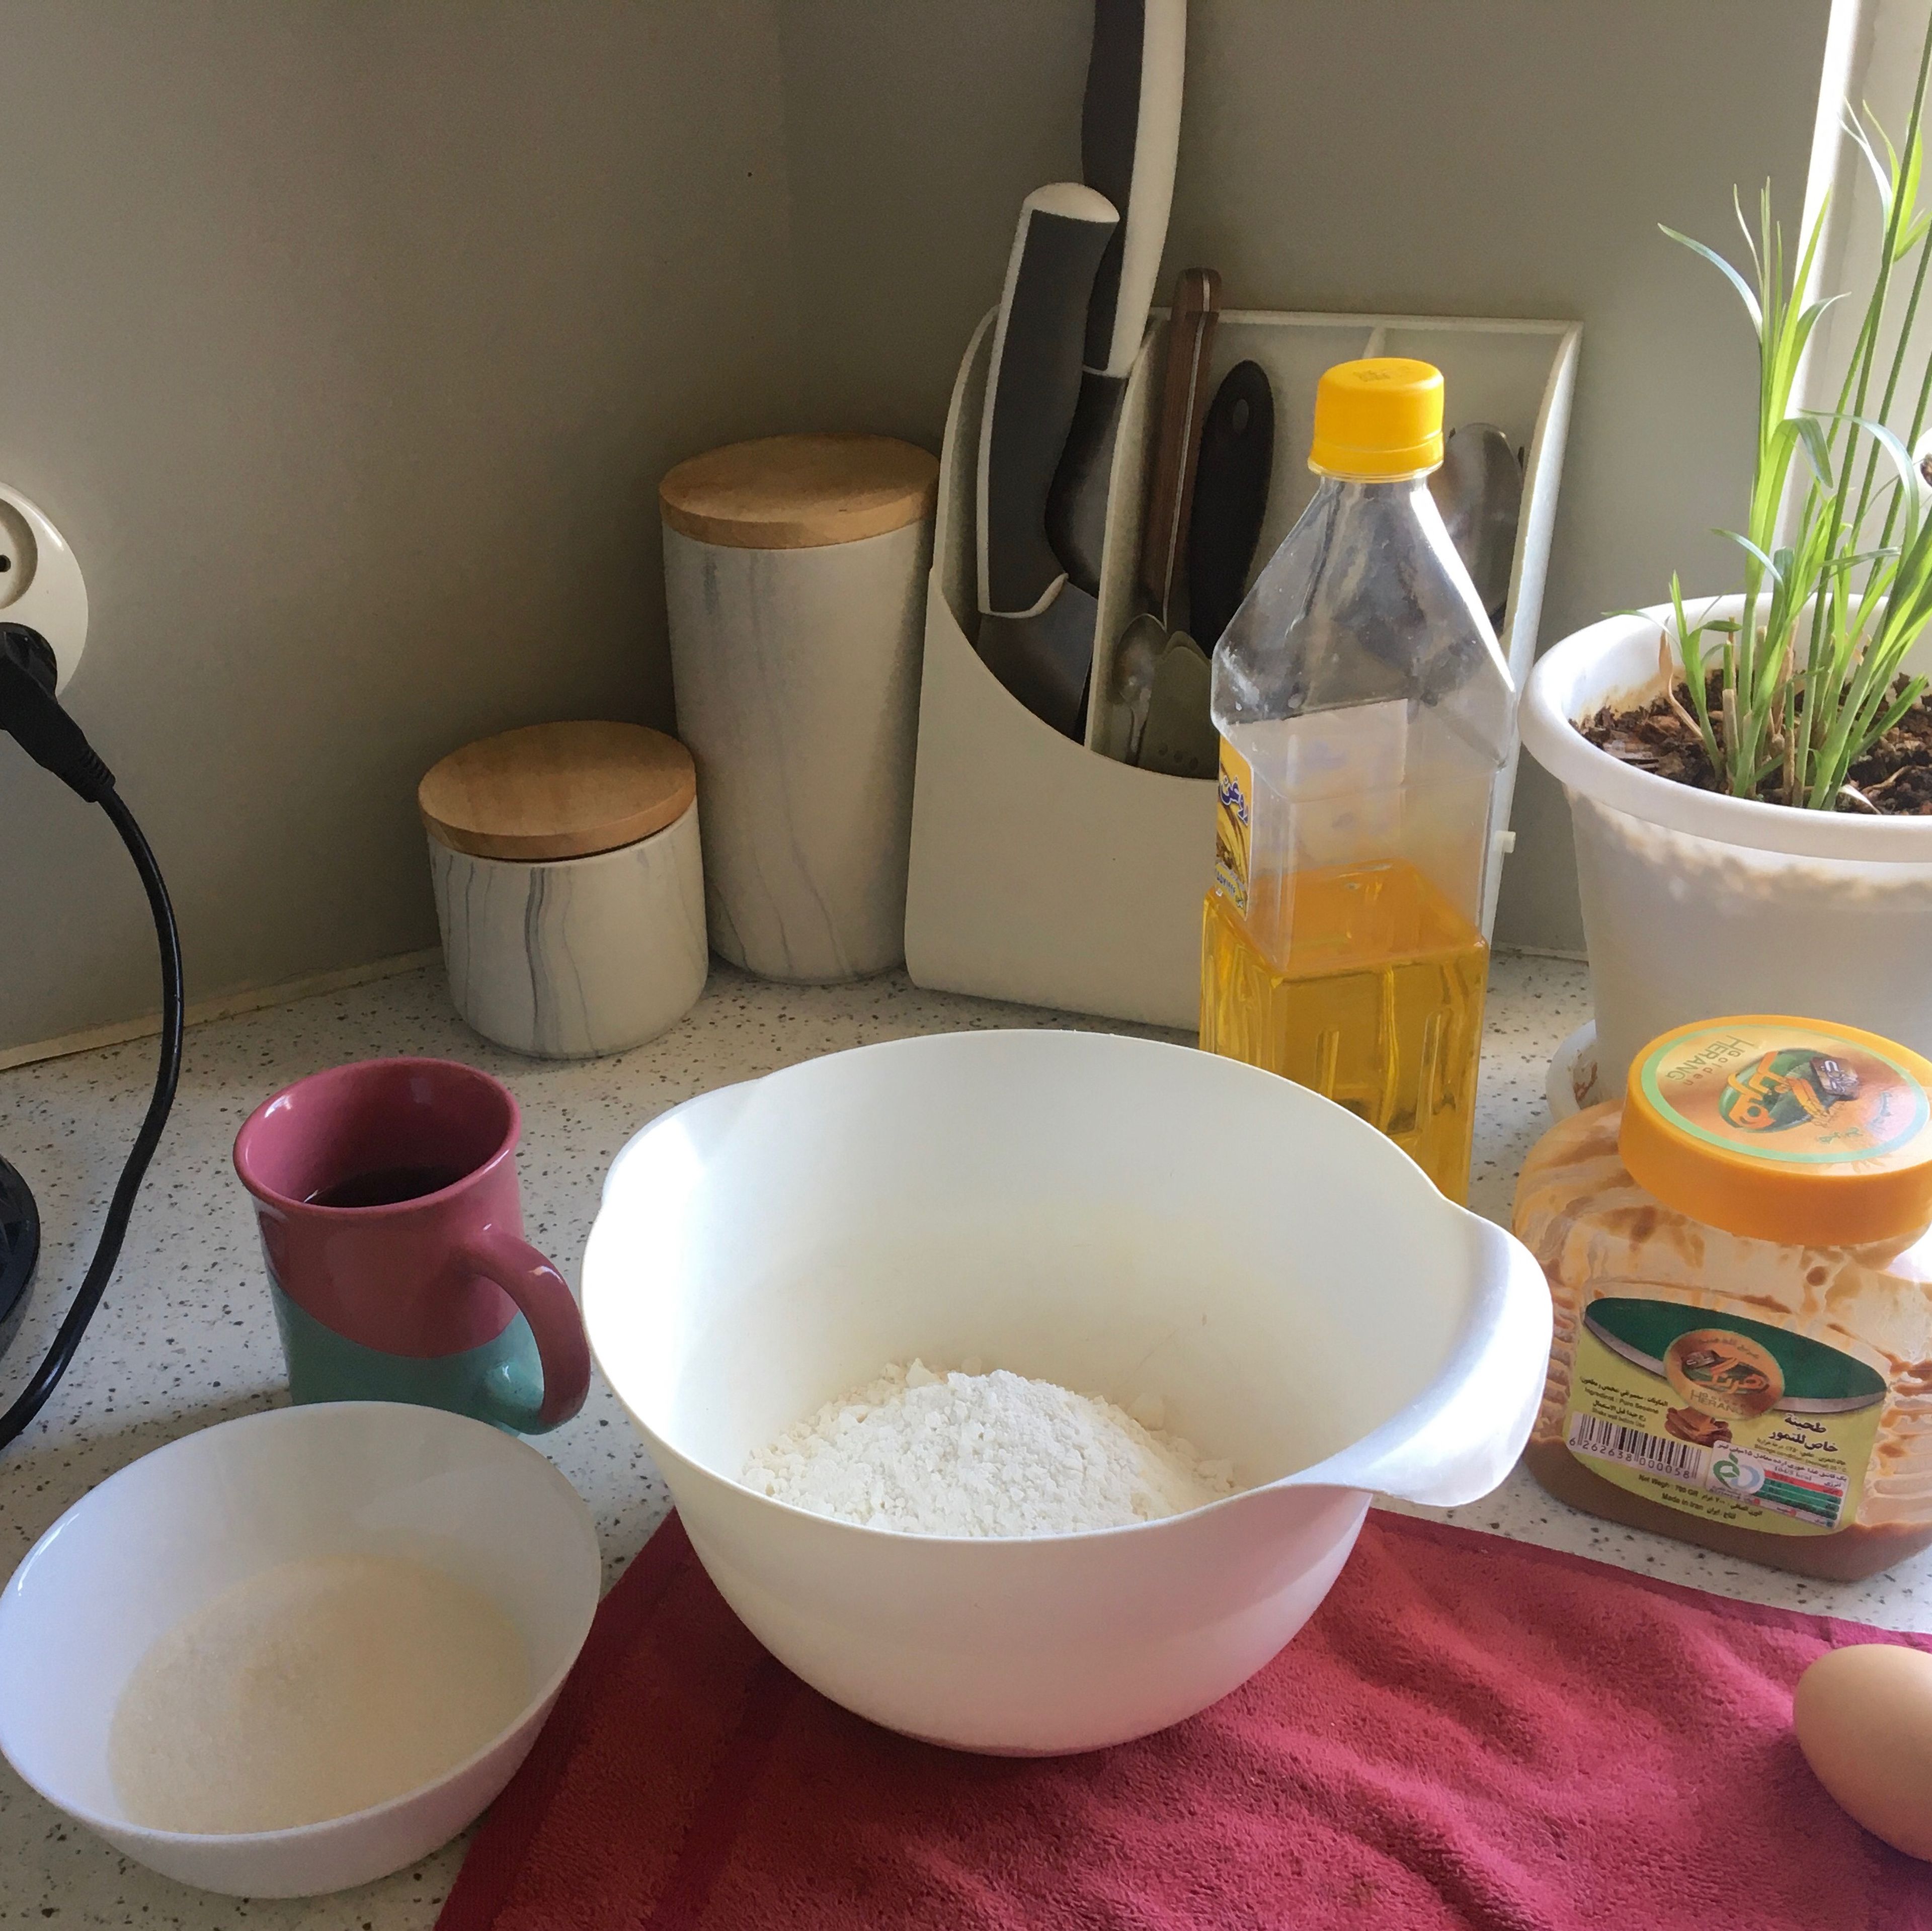 Heat the oven to 180 C. and prepare an springform pan. In a bowl, add the tahini, sesame oil, sugar, egg, coffee powder, salt and milk. Whisk until well combined.